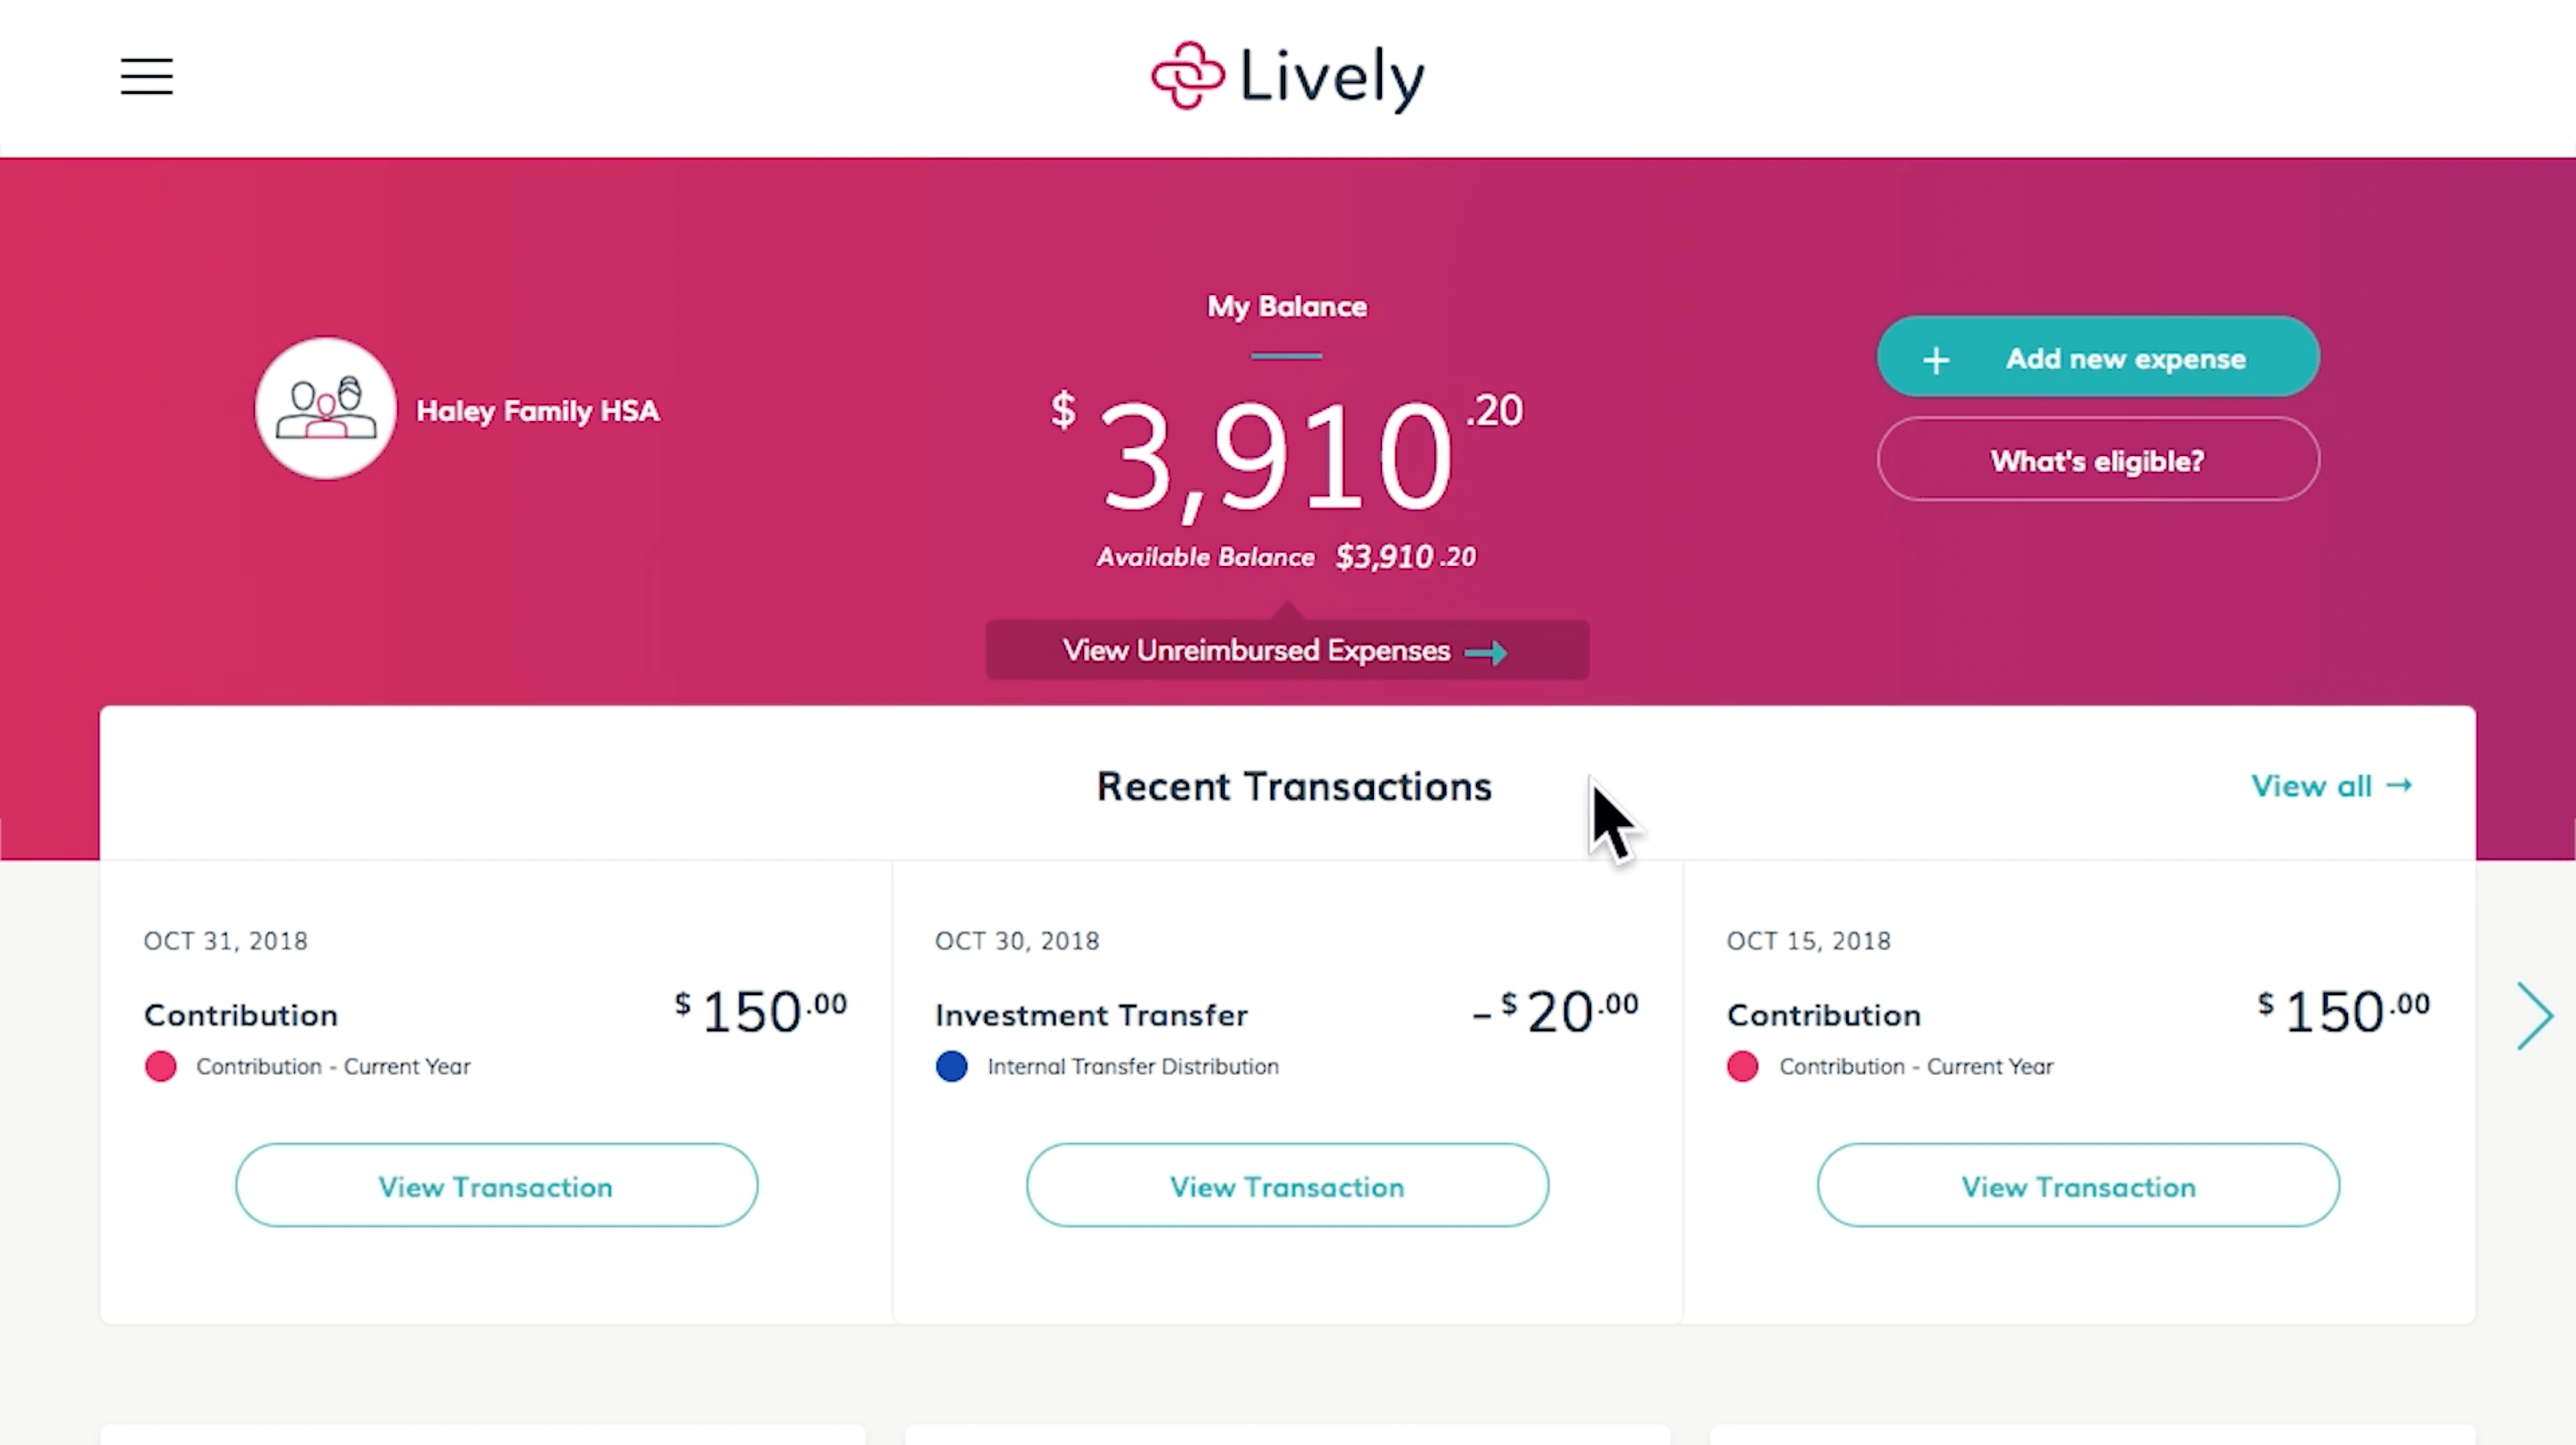 Image Lively employee dashboard video